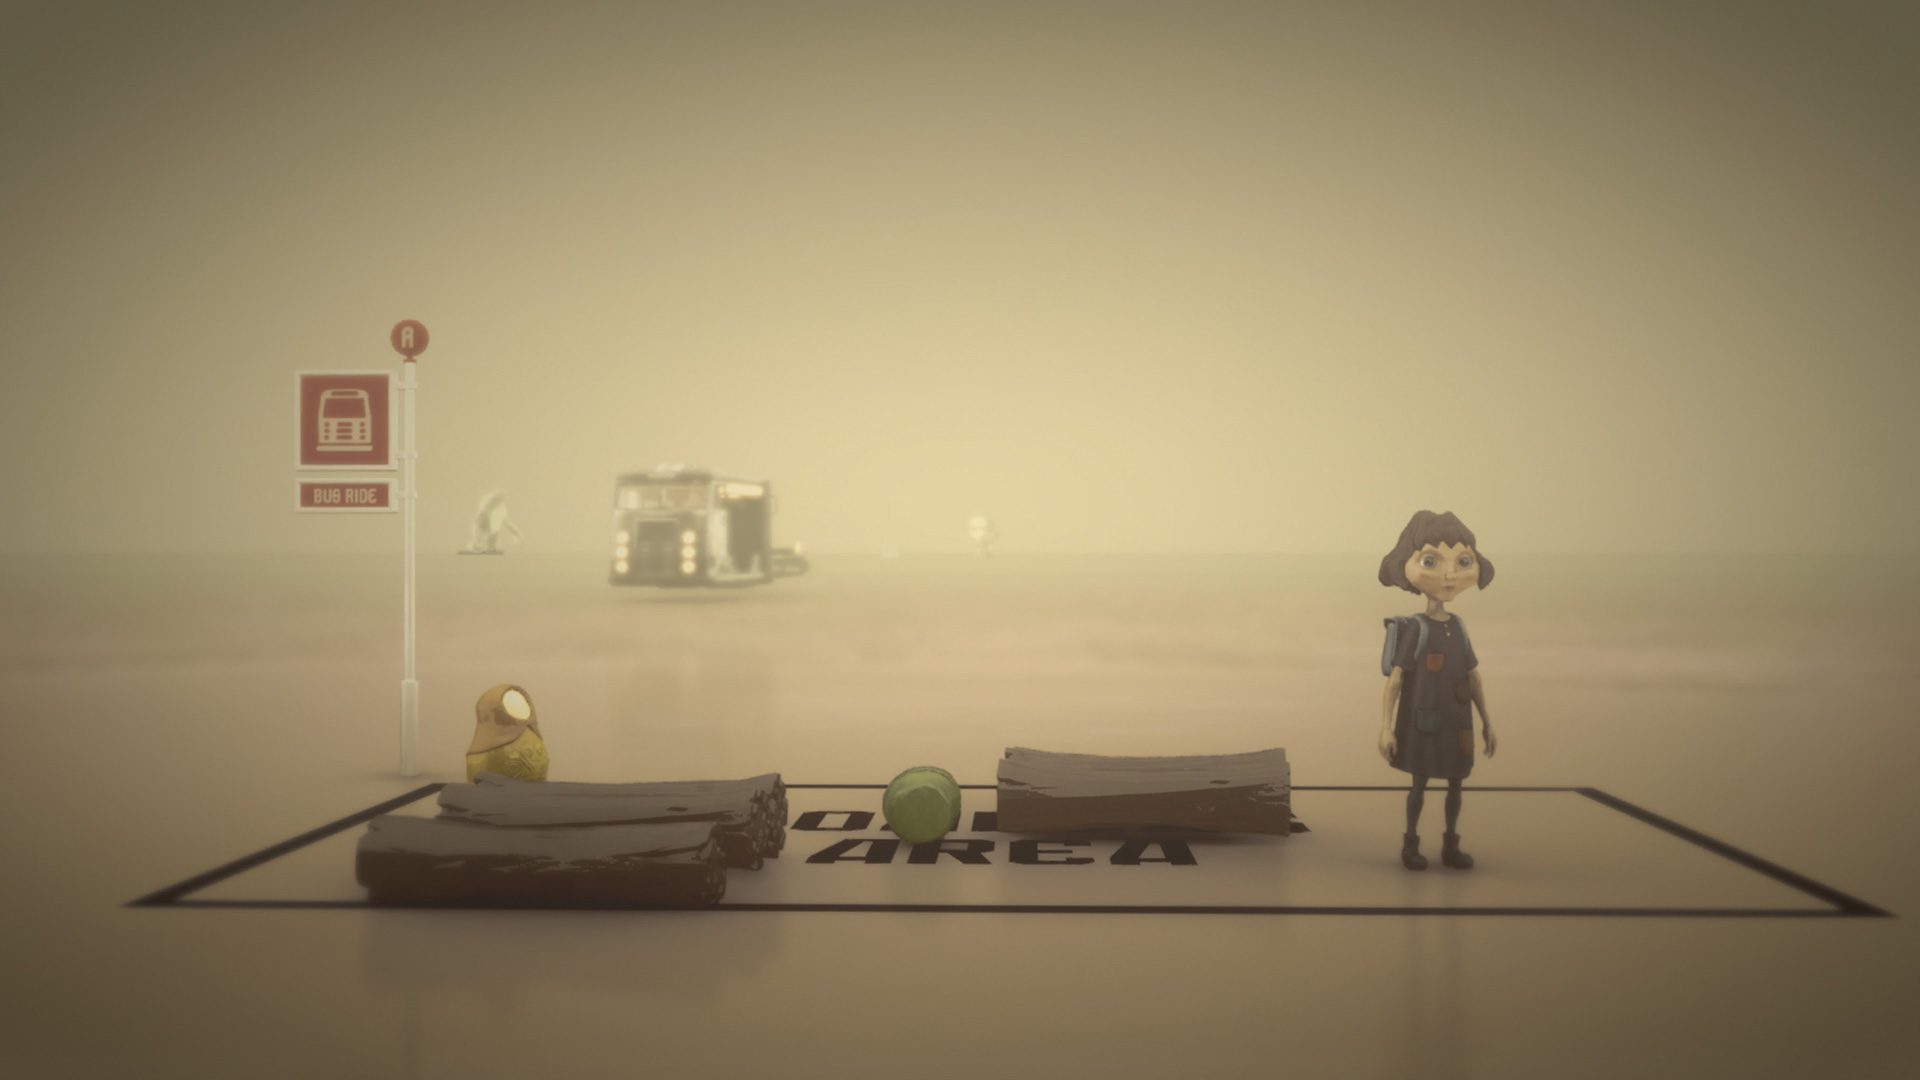 Waiting at the bus stop in The Tomorrow Children